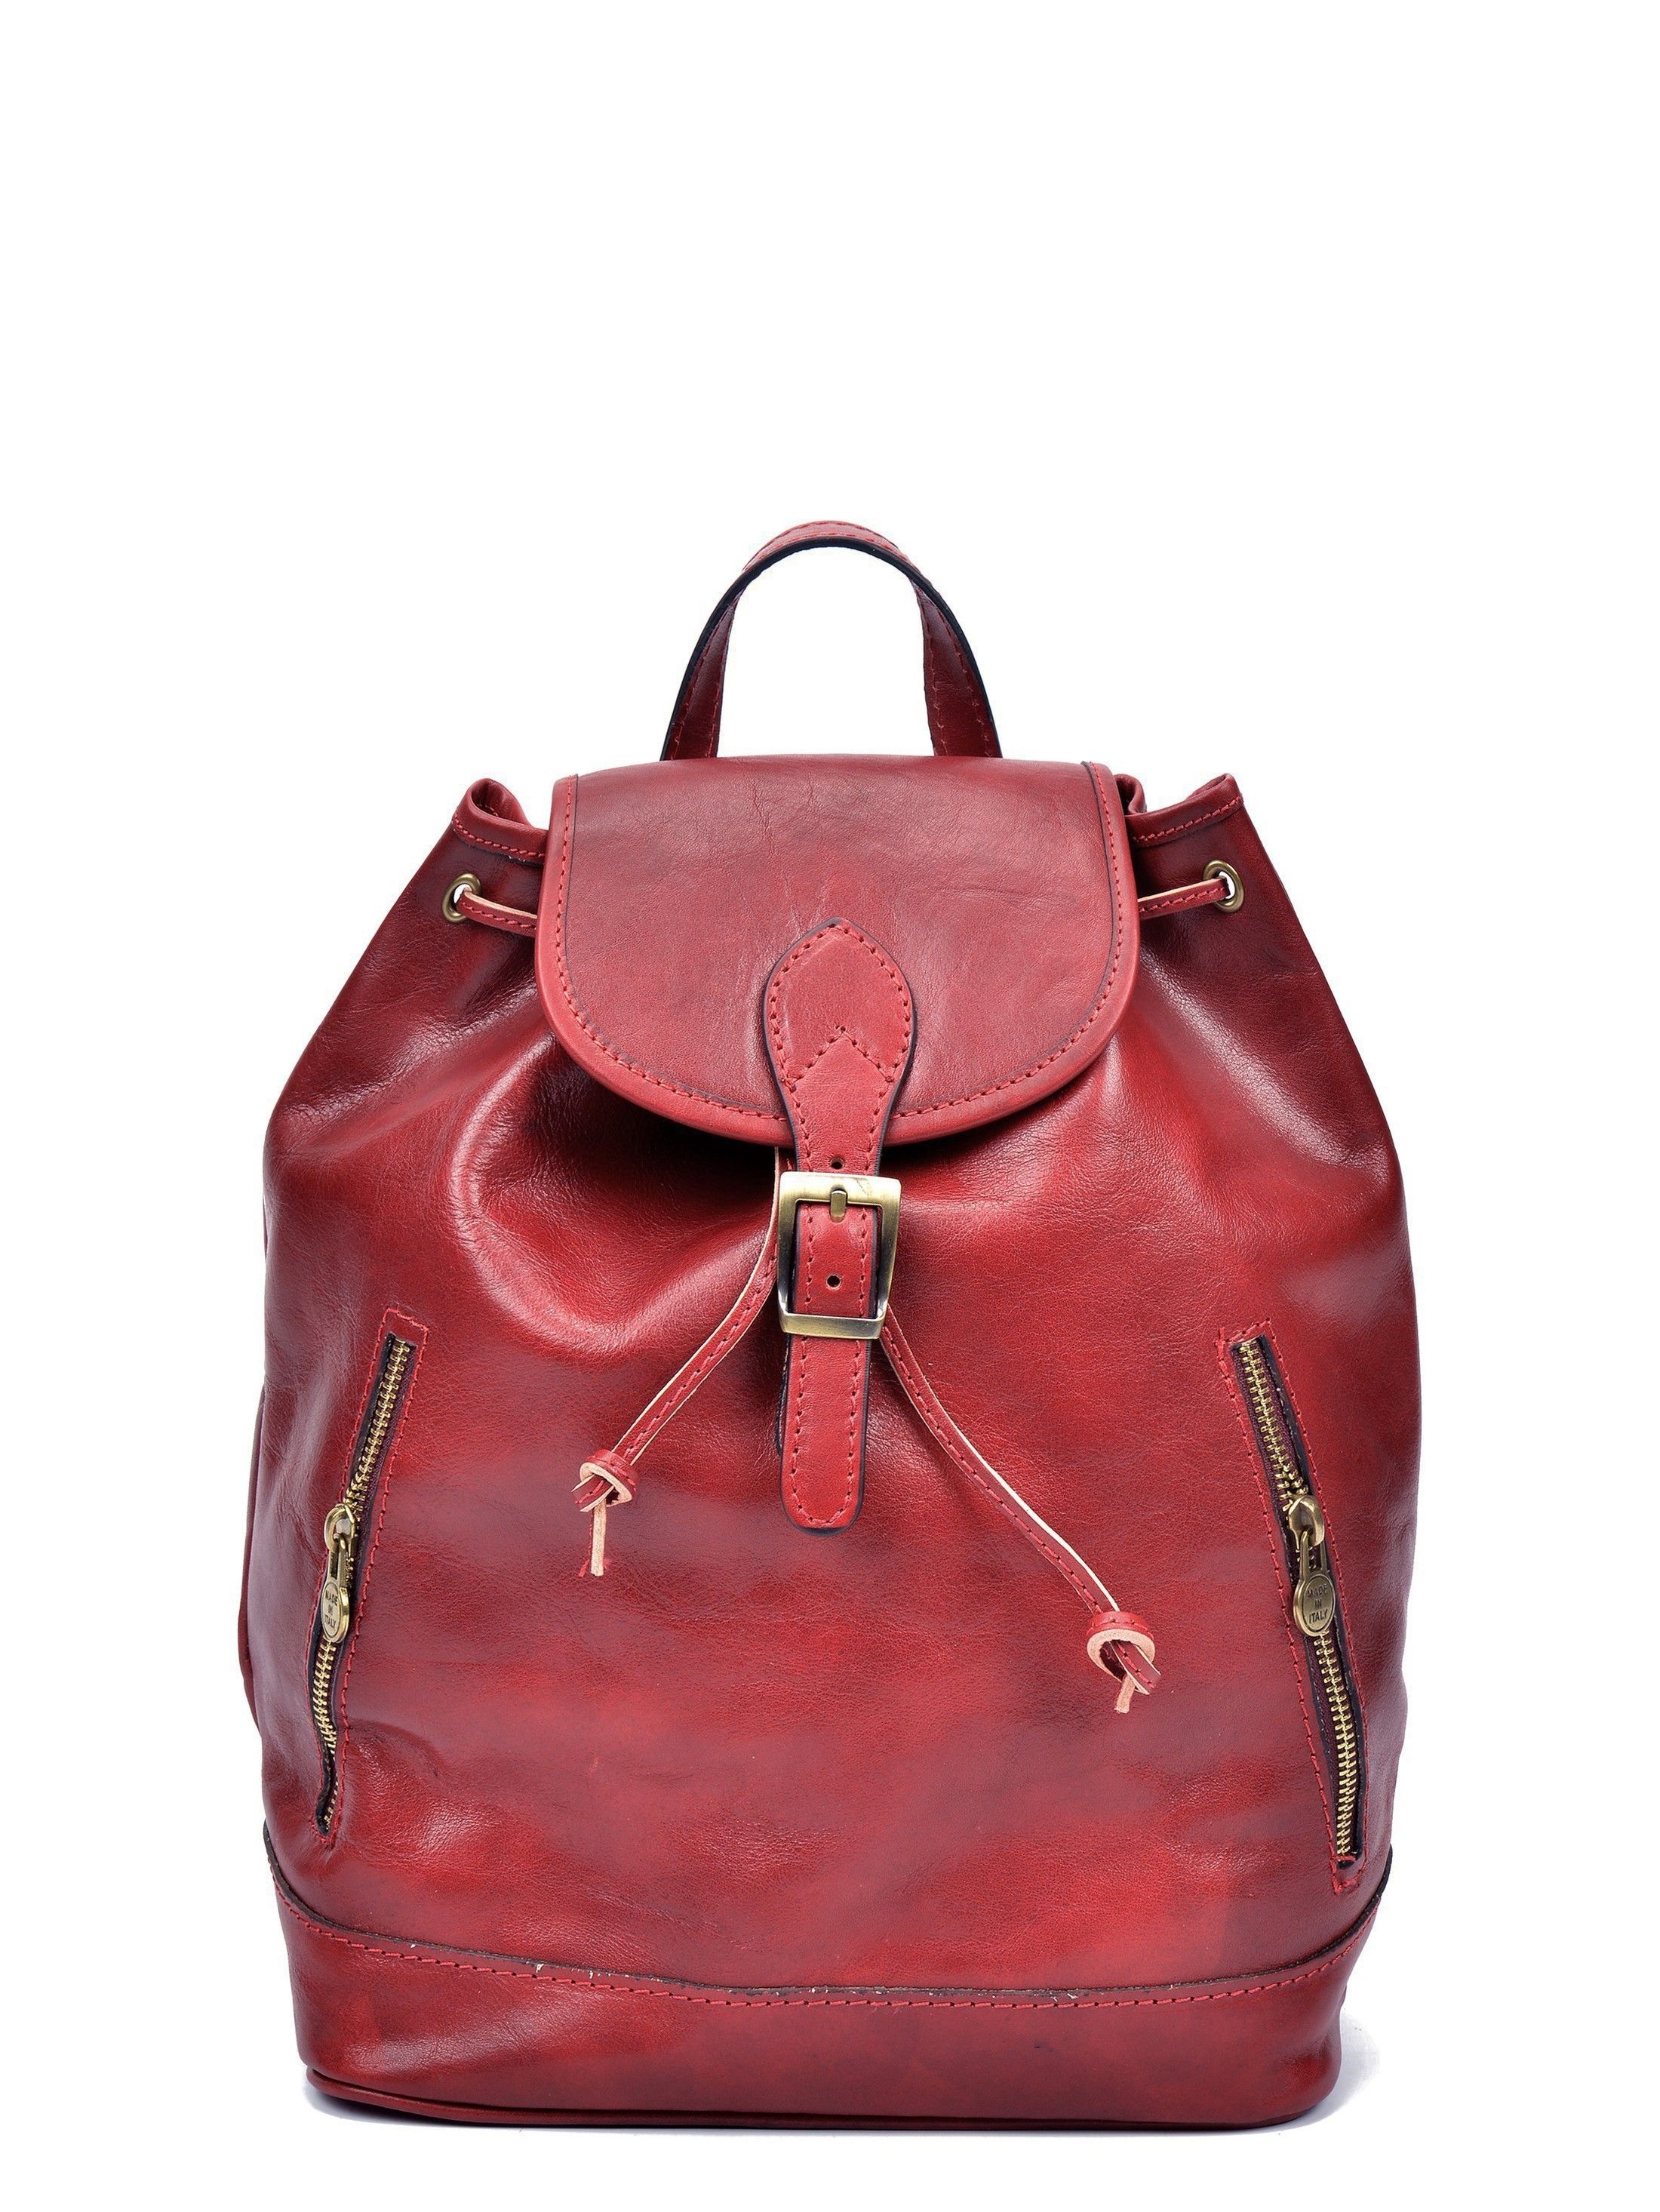 Backpack
Flap over with buckle closure
Drawstrings closure
Interior zip pocket
Adjustable shoulder straps
Composition: 100% cow leather
Brand metal plate
Dimensions (M): 32x36x14cm